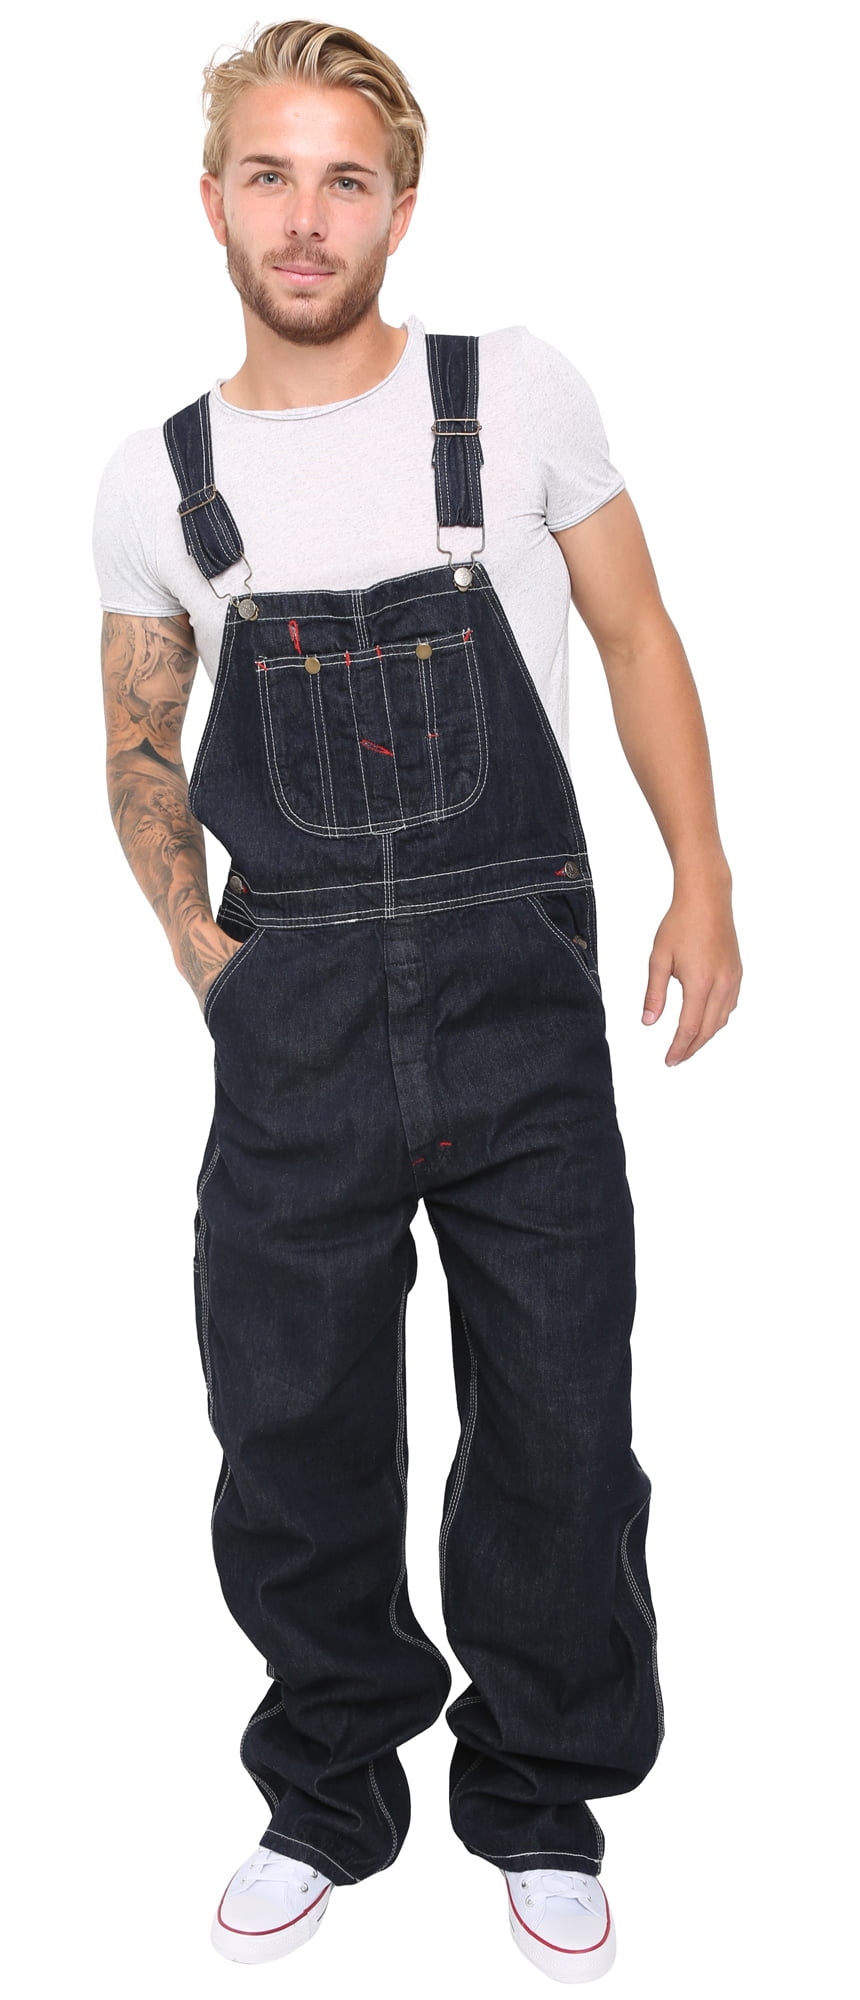 DIGITAL SPOT Men Bib and Braces with Clips Painter Dungaress Adults Work Wear Trouser Overall 